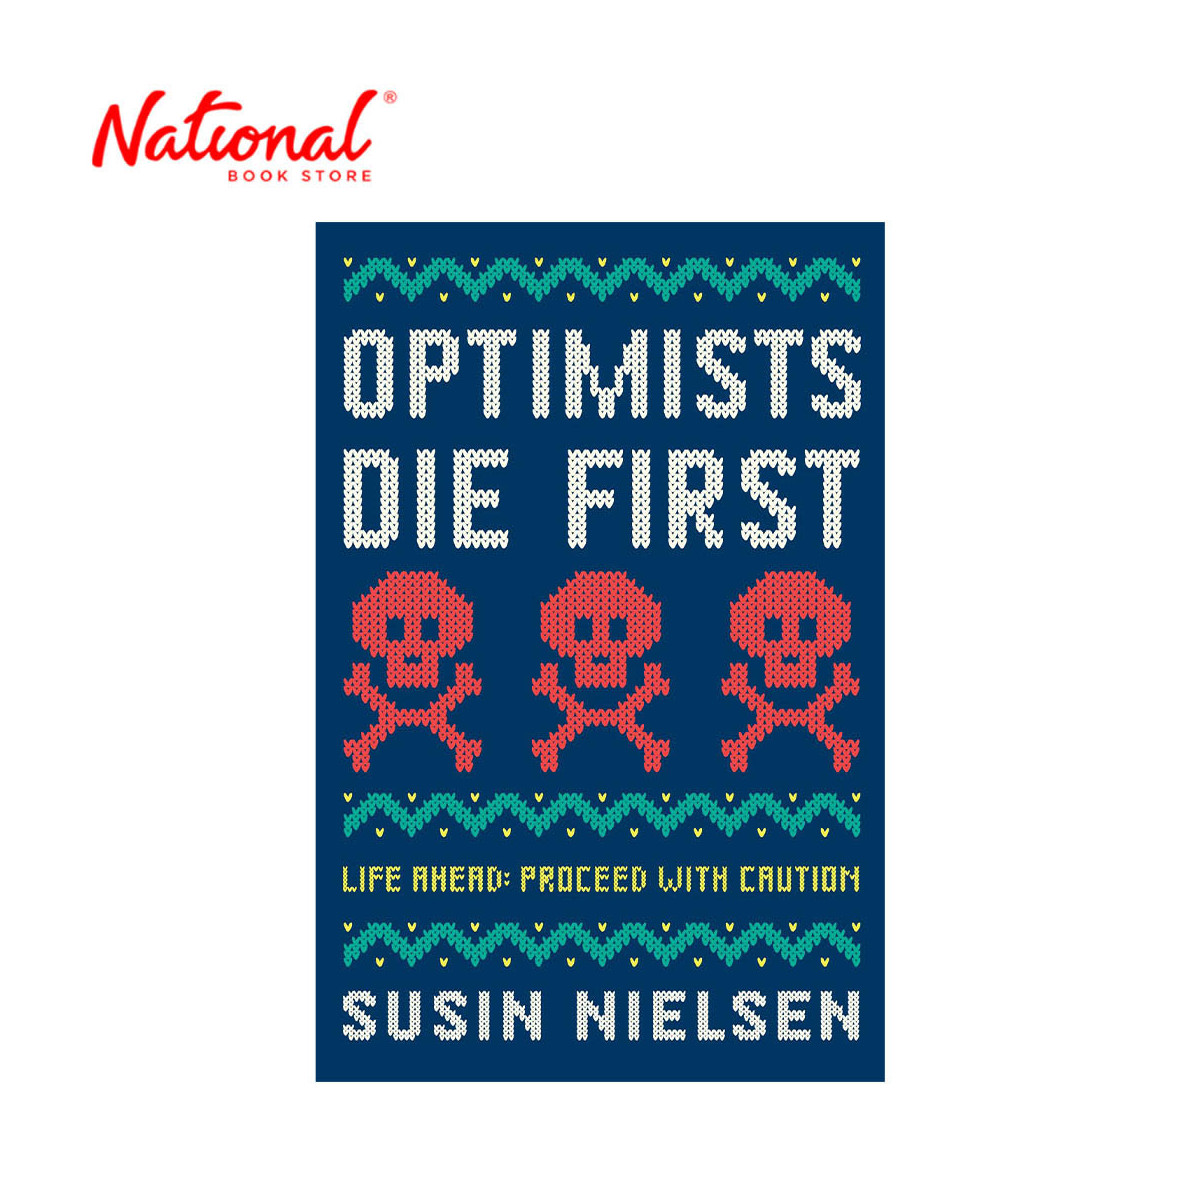 Optimists Die First by Susin Nielsen - Trade Paperback - Teens Fiction - Romance